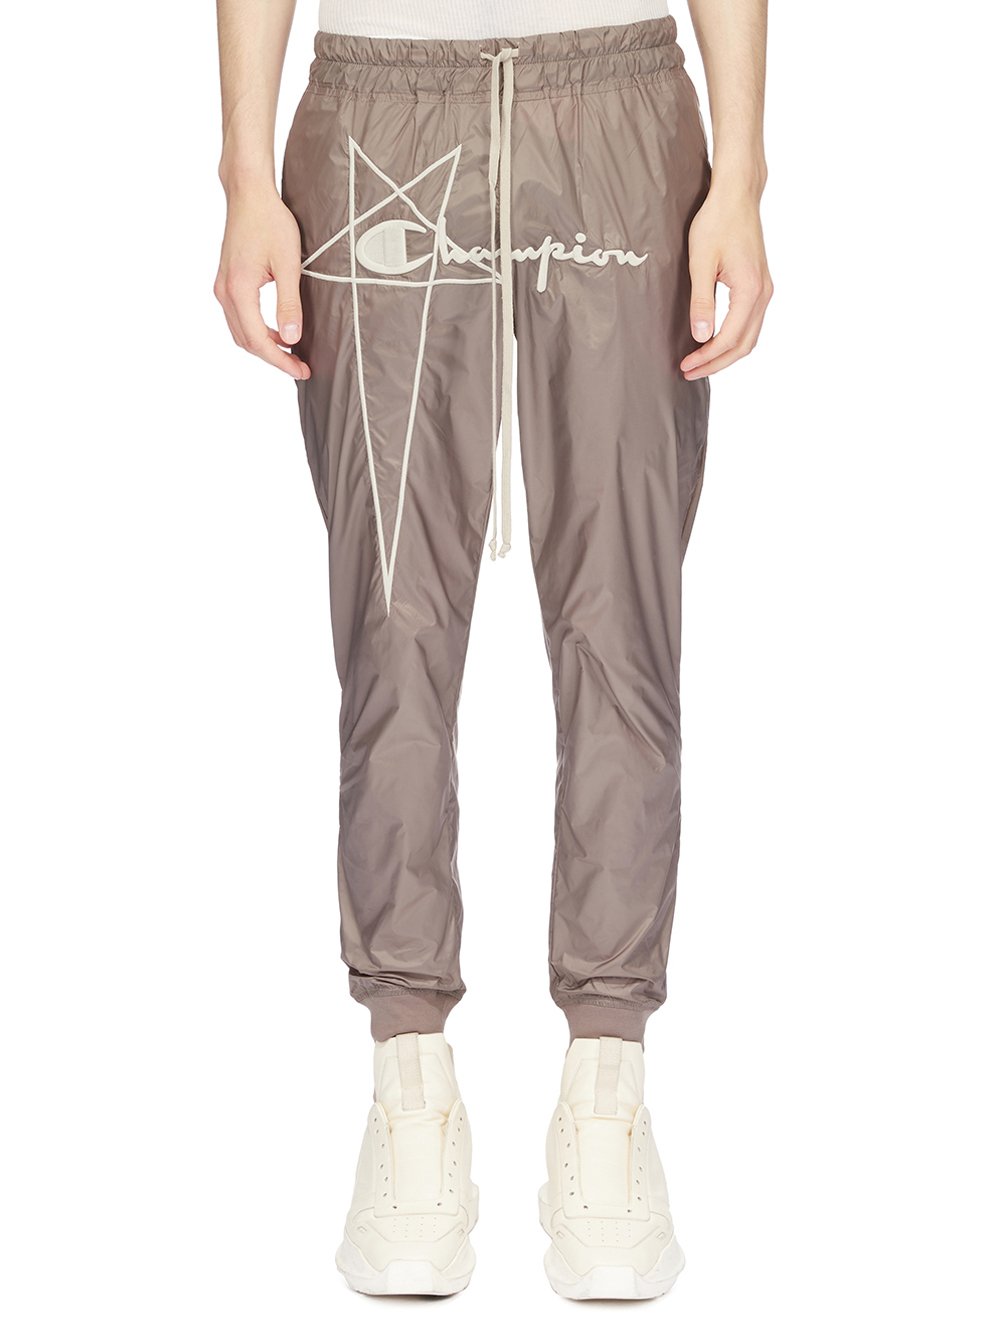 CHAMPION X RICK OWENS JOGGERS IN DUST GREY RECYCLED NYLON